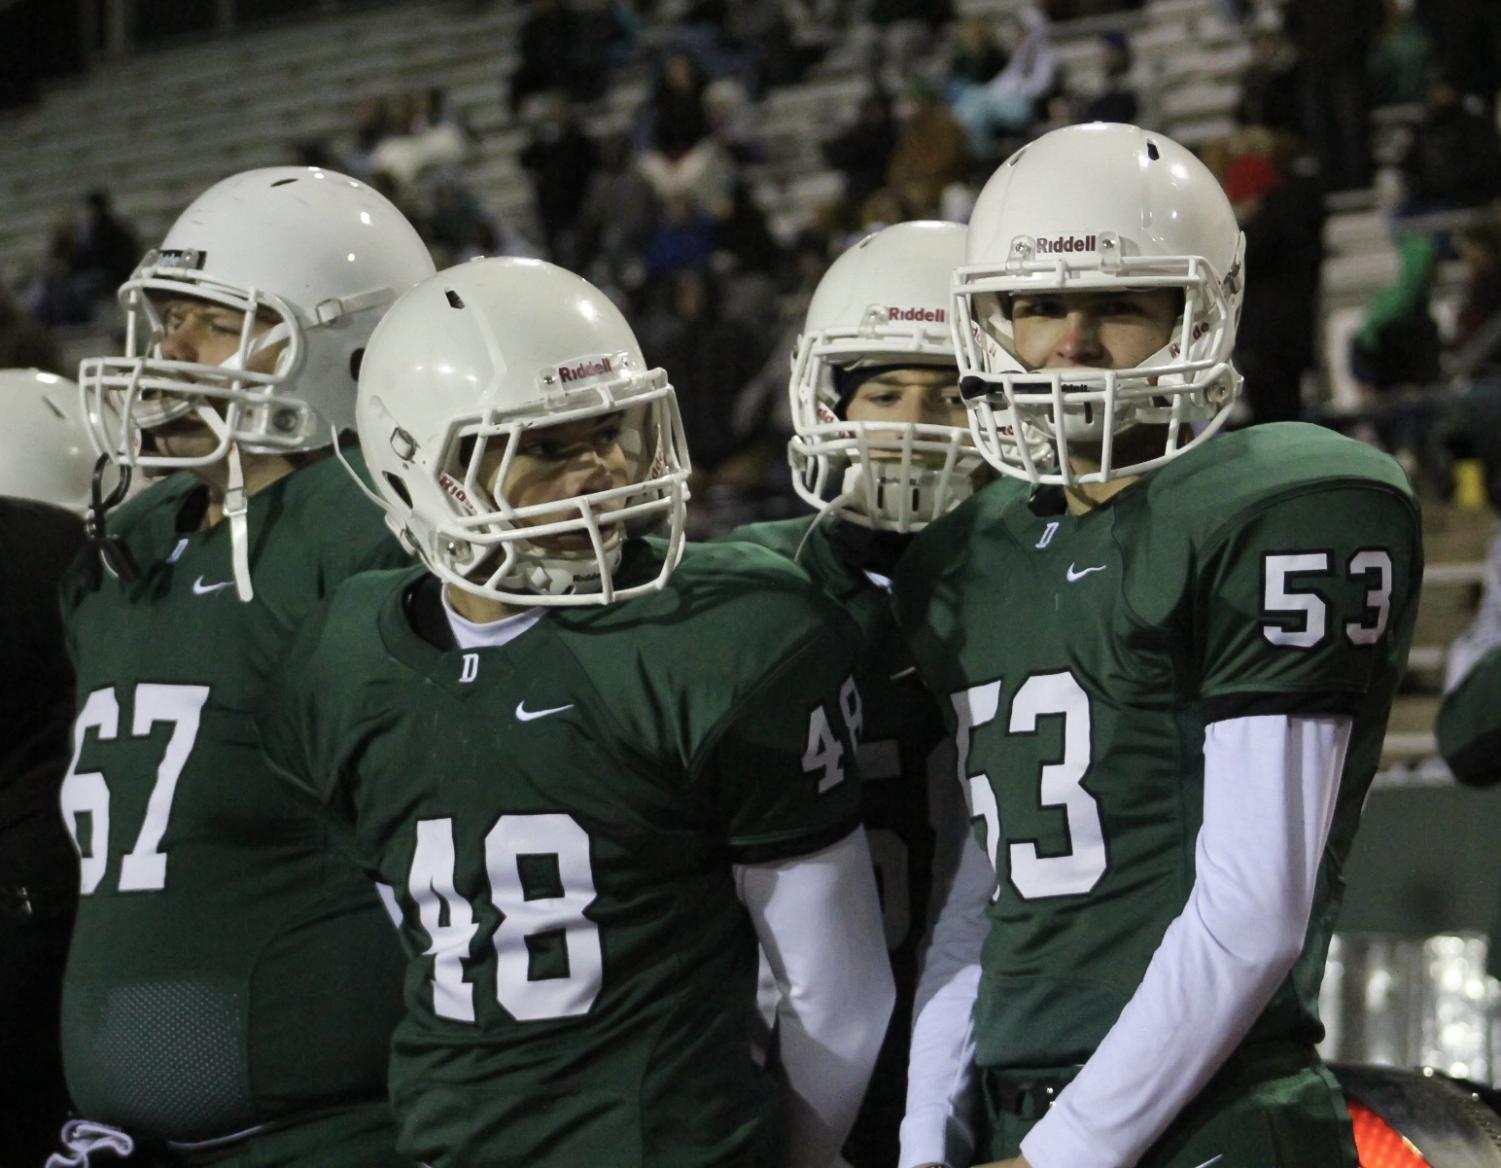 Derby+vs.+Topeka+Football+photo+gallery+%28Photos+by+Grace+Reich%29